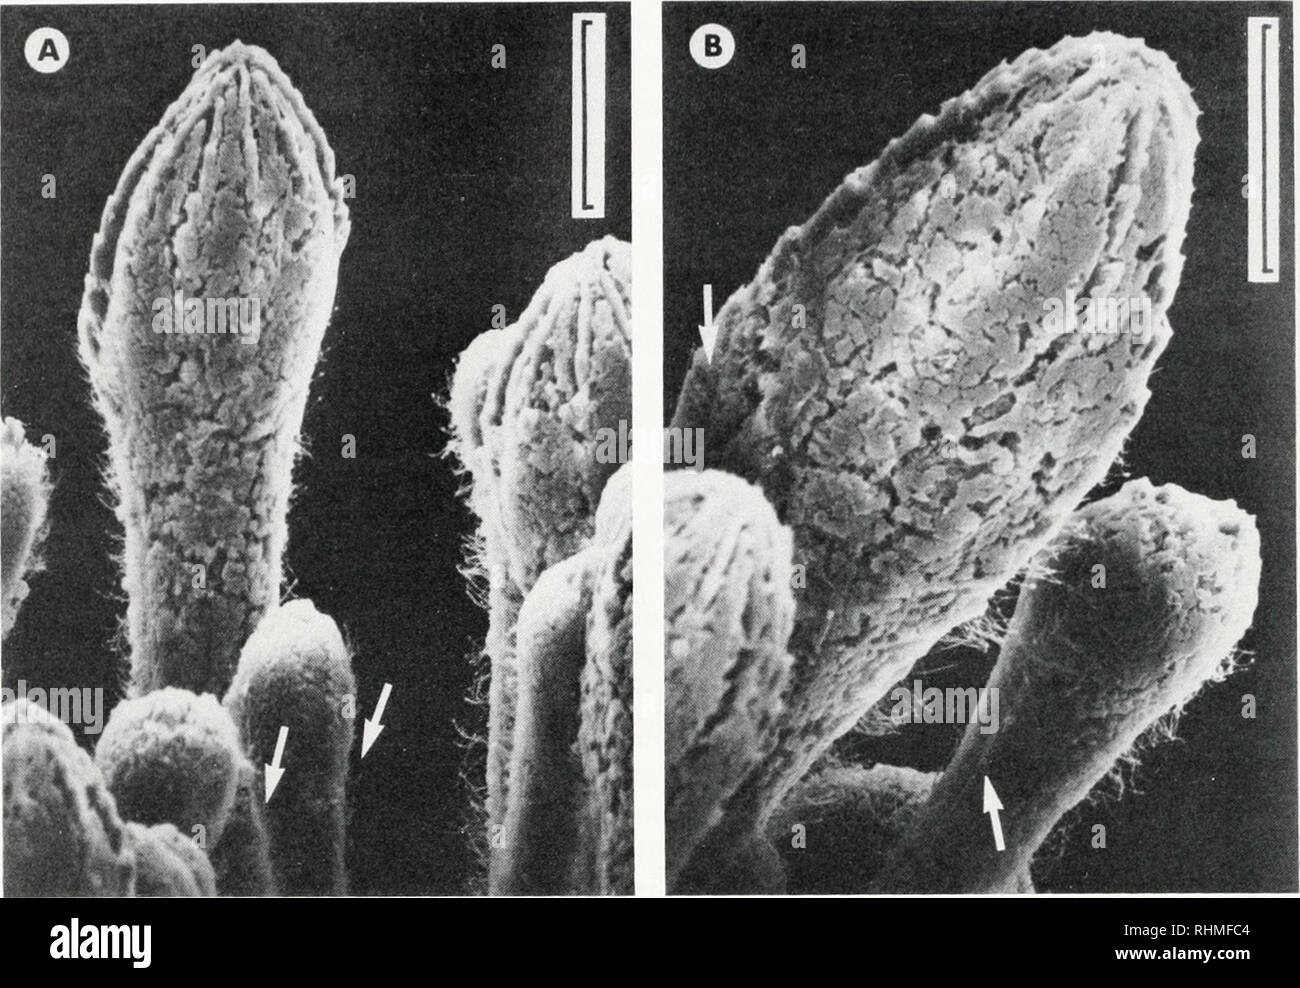 . The Biological bulletin. Biology; Zoology; Biology; Marine Biology. 578 O. ELLERS AND M. TELFORD. FIGURE 3. SEM micrographs of aboral miliary and club-shaped spines. Ciliary bands on some spines are clearly visible, arrows indicate those that are less conspicuous. Scale bar: 100 ^m. A) Two diametrically opposed bands on club-shaped spine; B) more oblique view of another club-shaped spine and bands of cilia on a miliary spine. flowed perpendicularly to the orientation of the ciliary bands, they were unidirectional and we never saw reversals of flow. Between spines on the aboral surface, parti Stock Photo